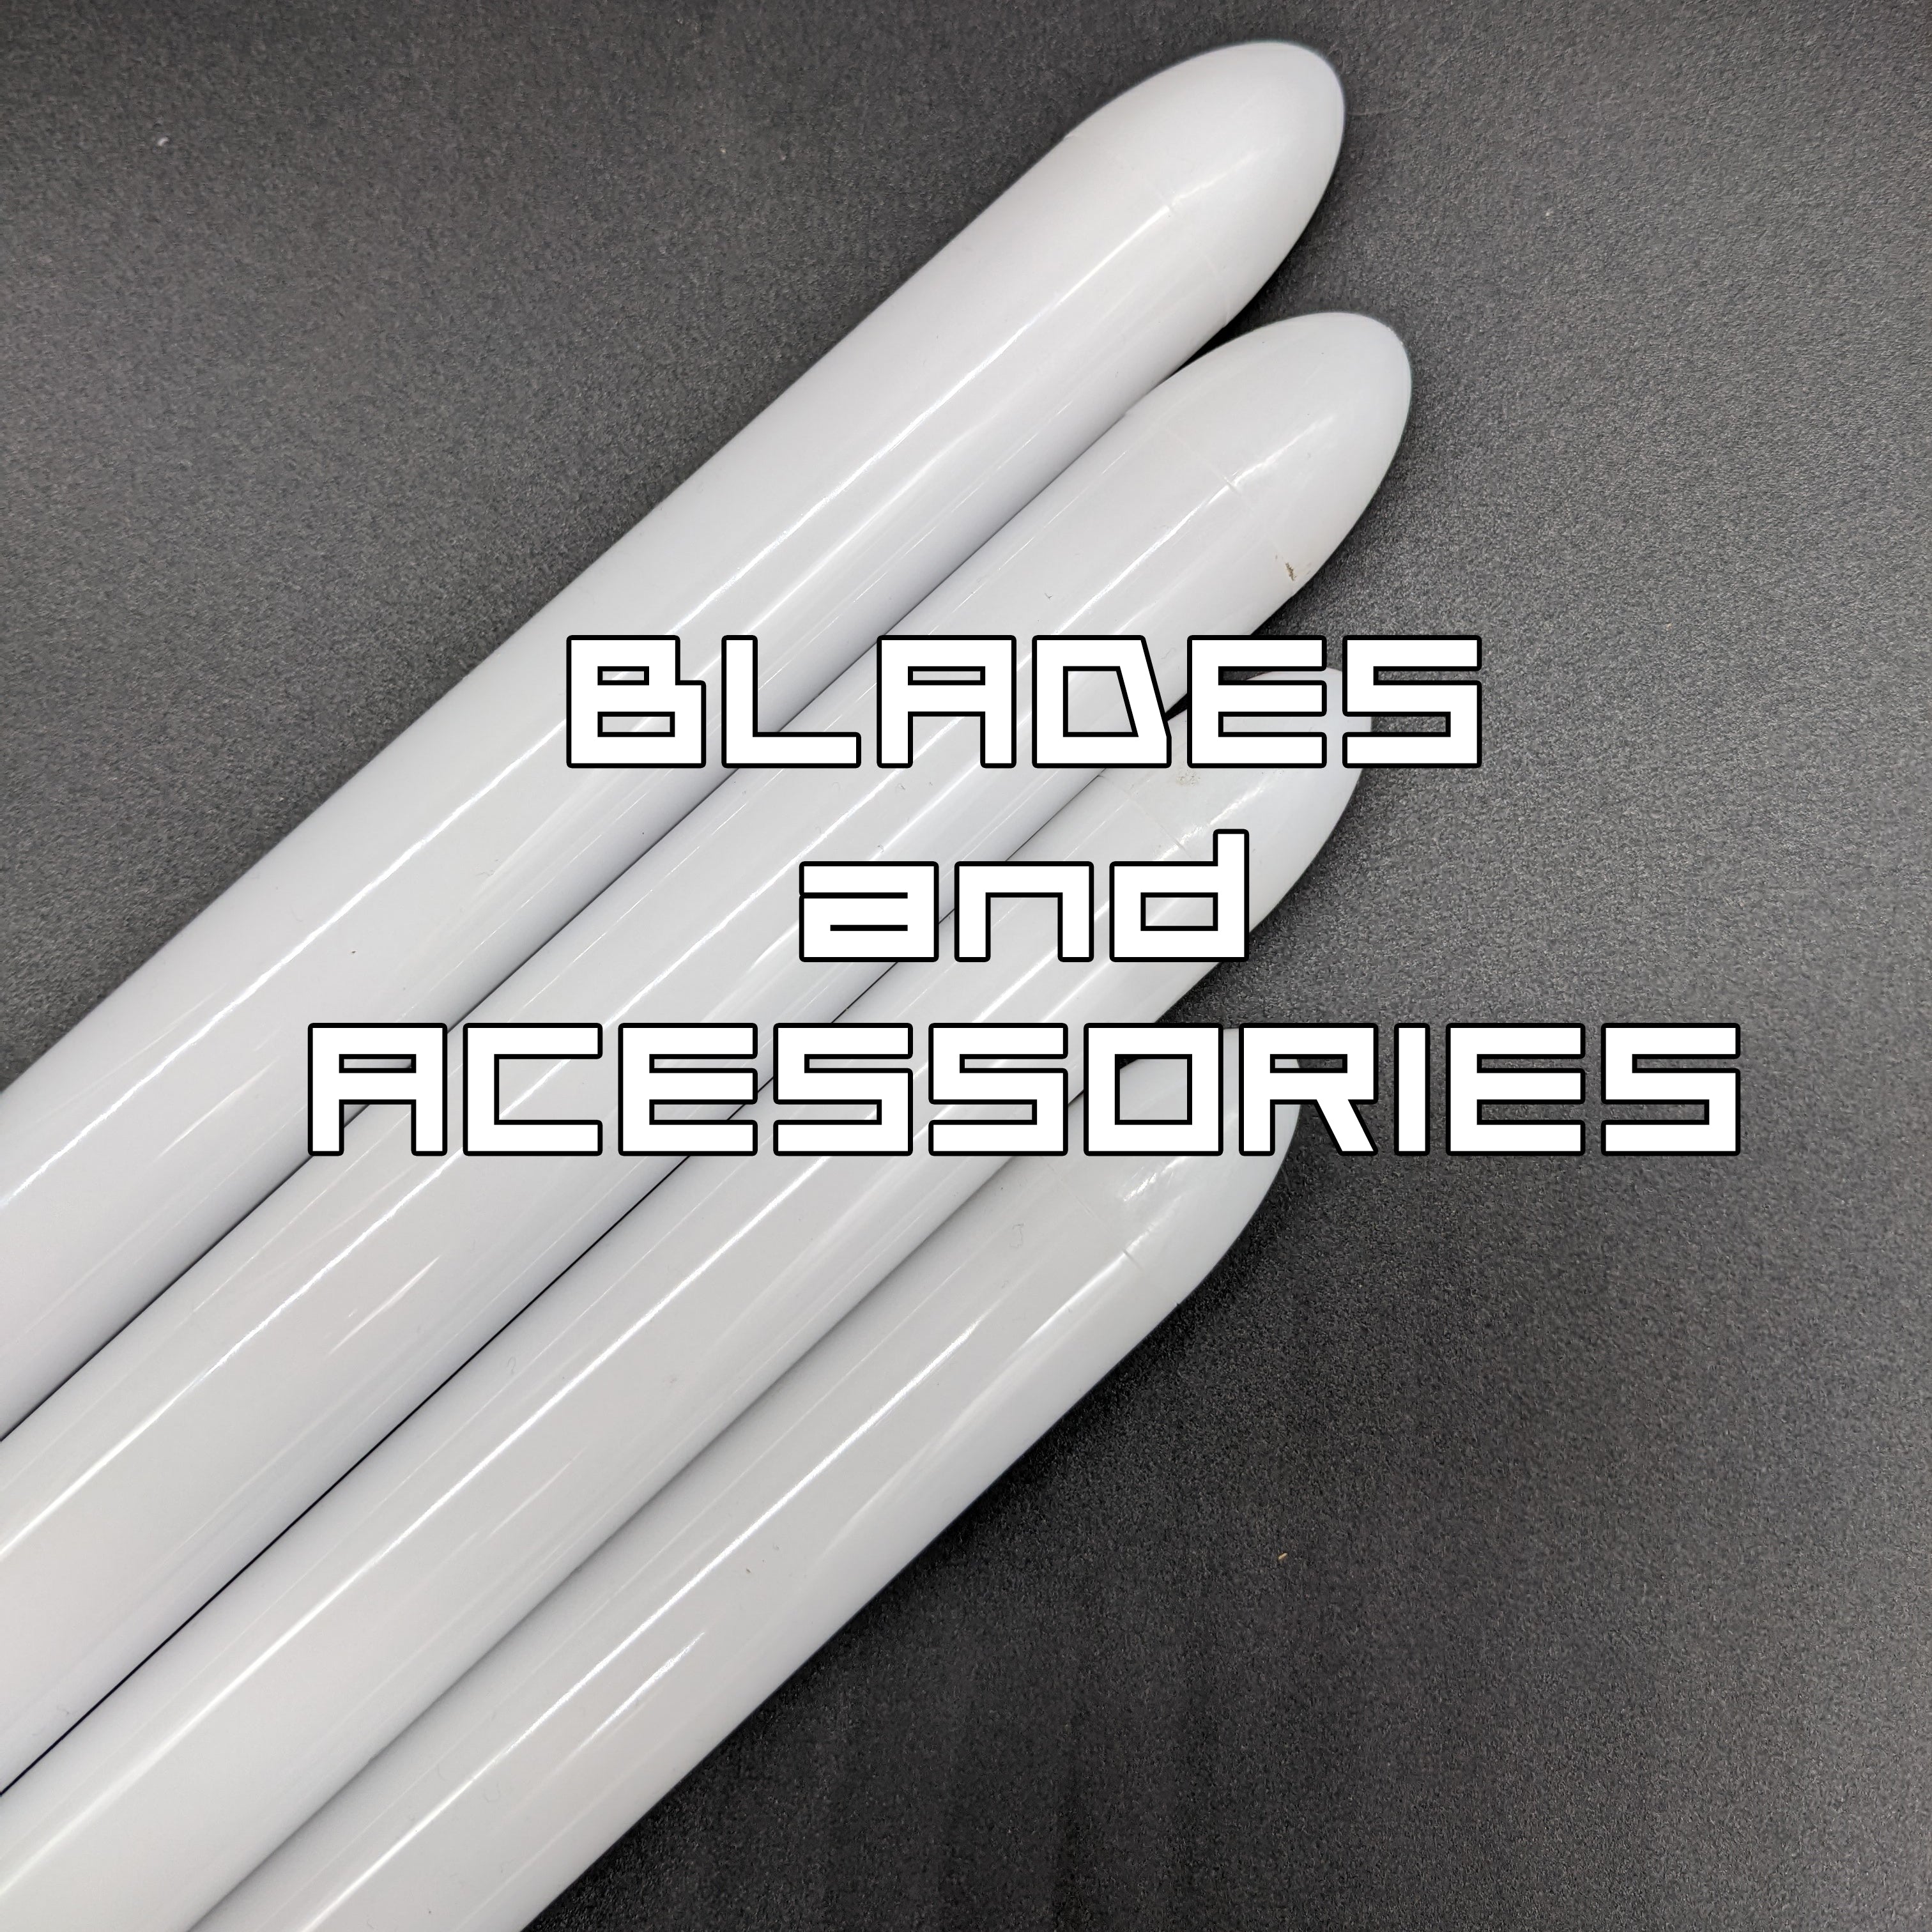 Blade and Blade Accessories